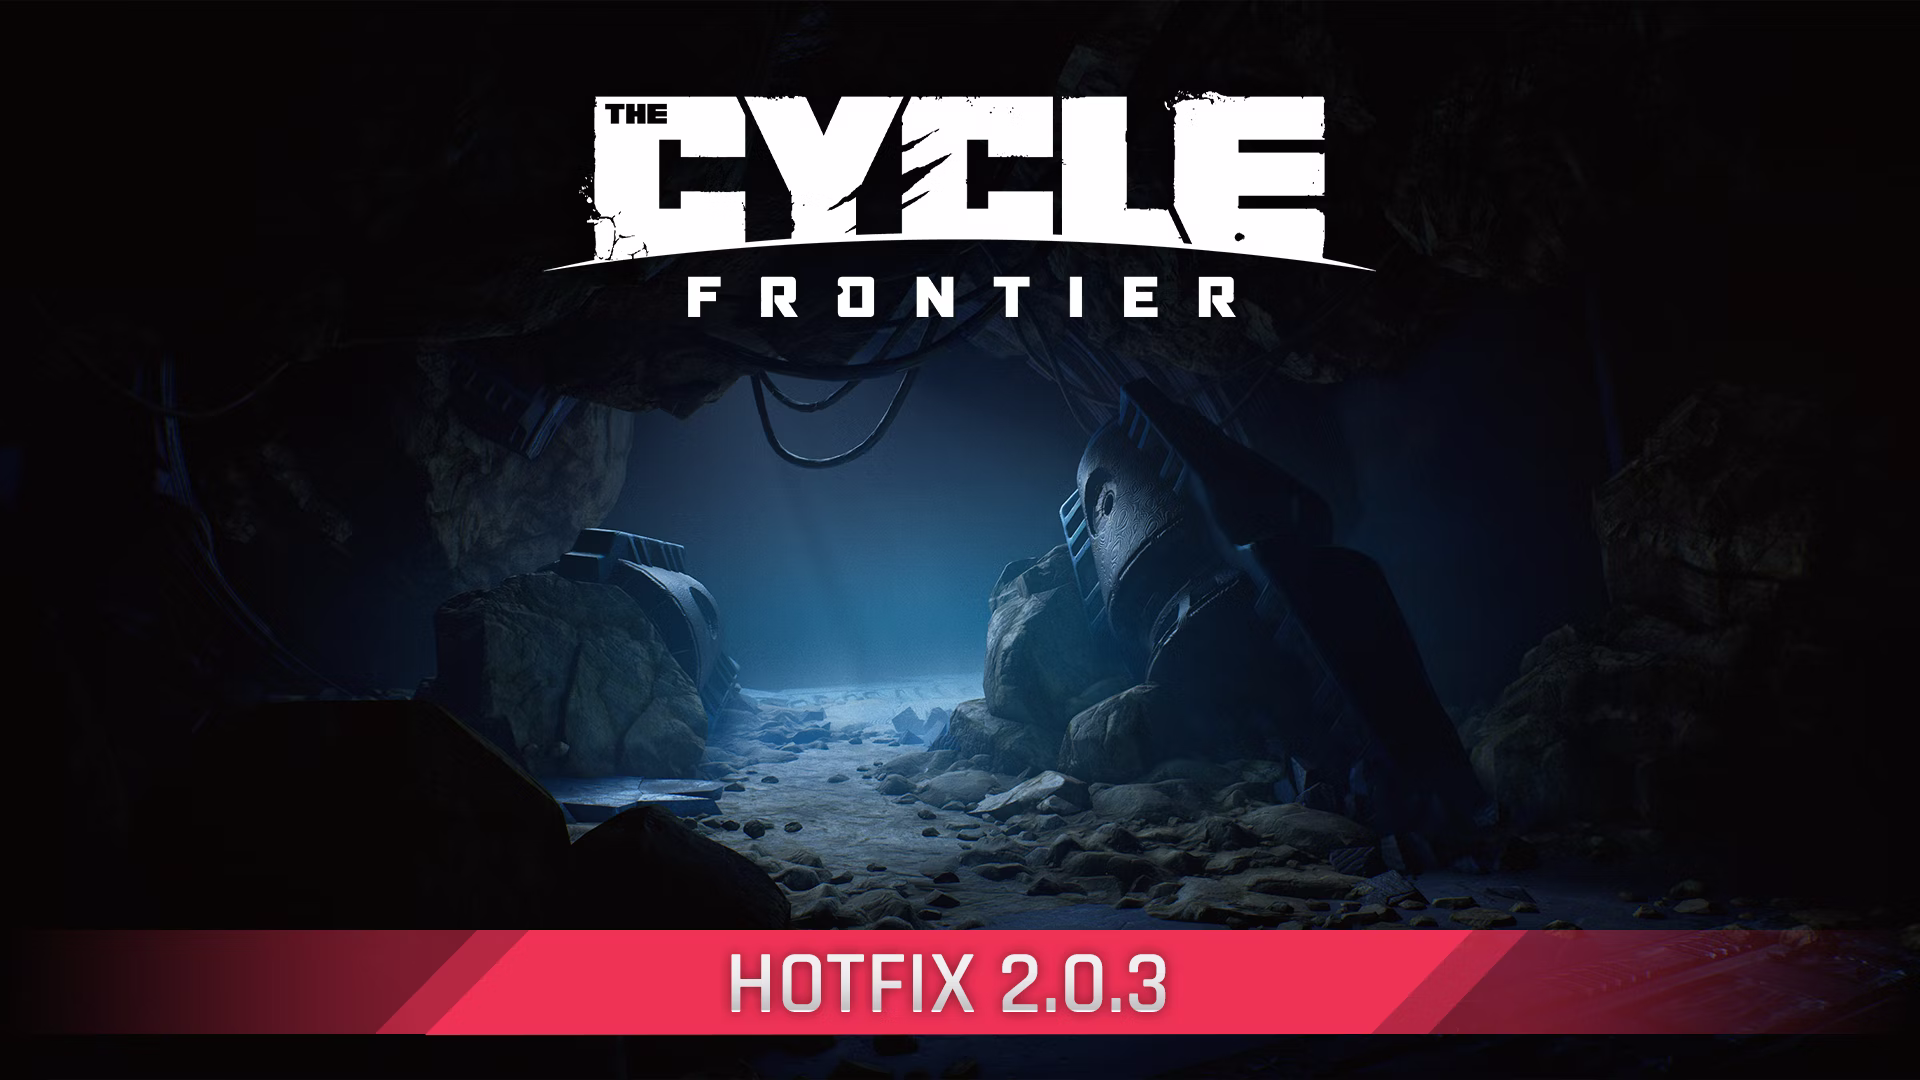 THE CYCLE: FRONTIER - HOTFIX 2.0.3